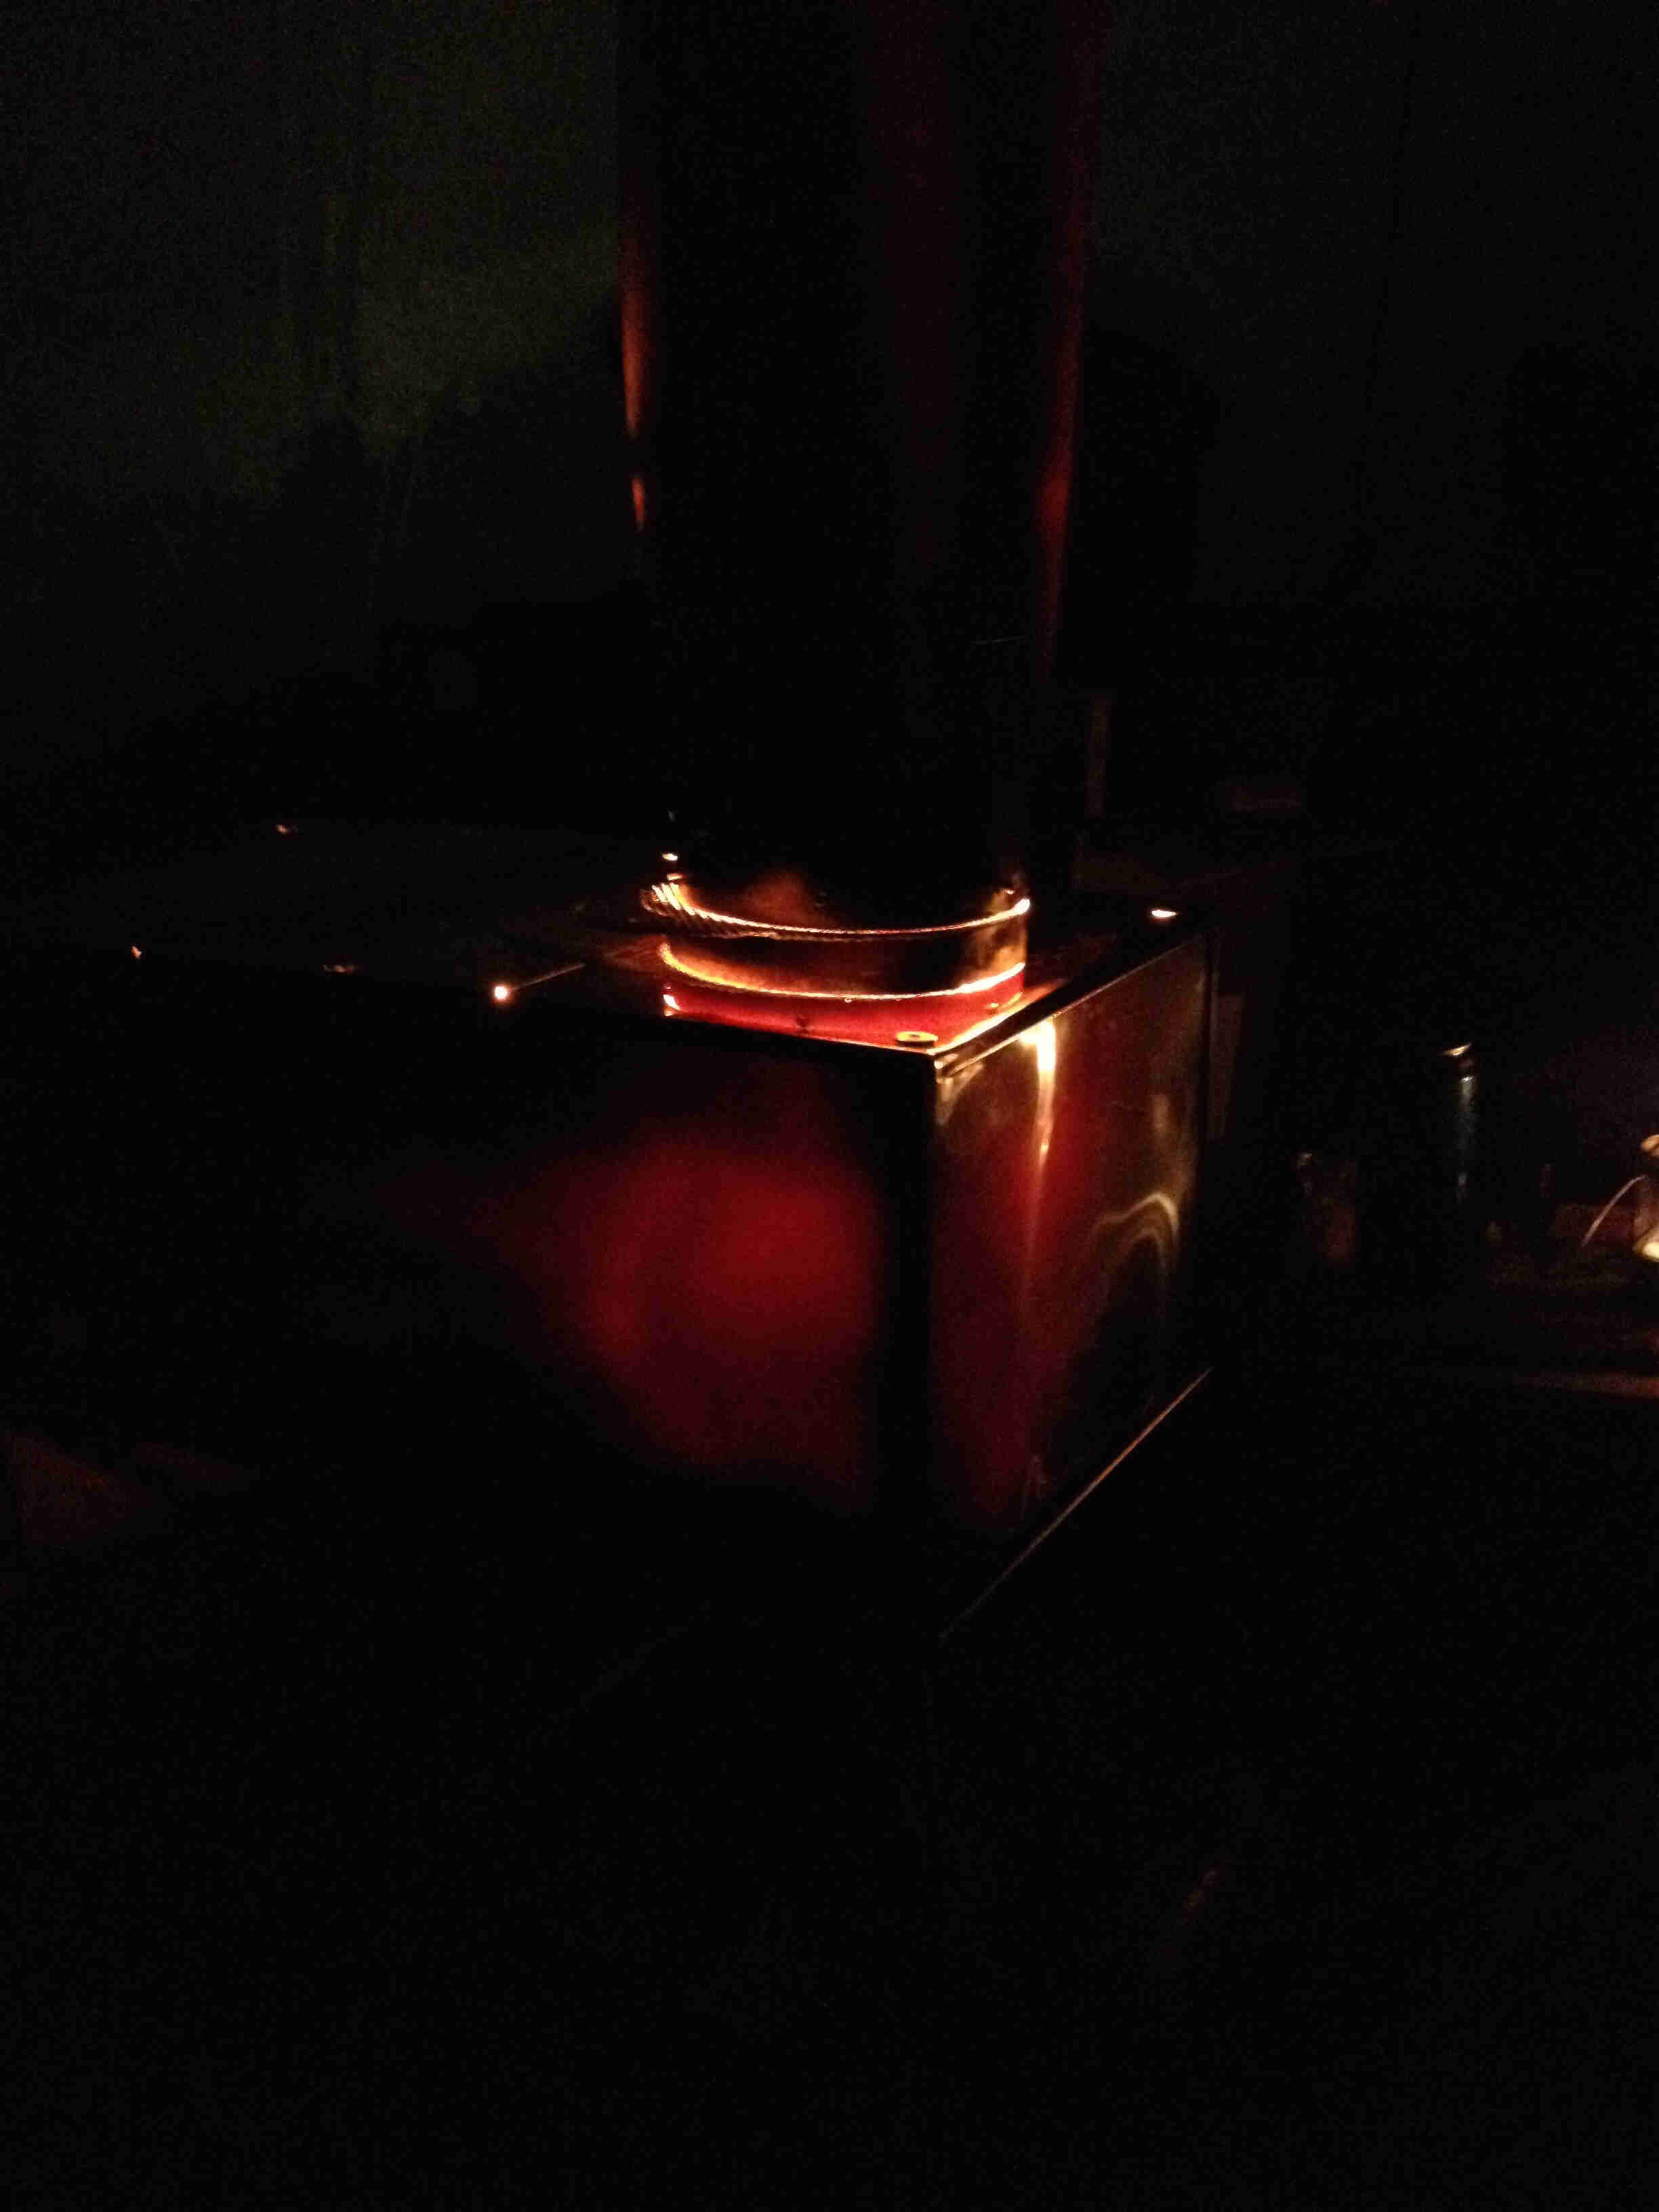 Dark, nighttime view of a stainless steel portable stove with a glowing burner